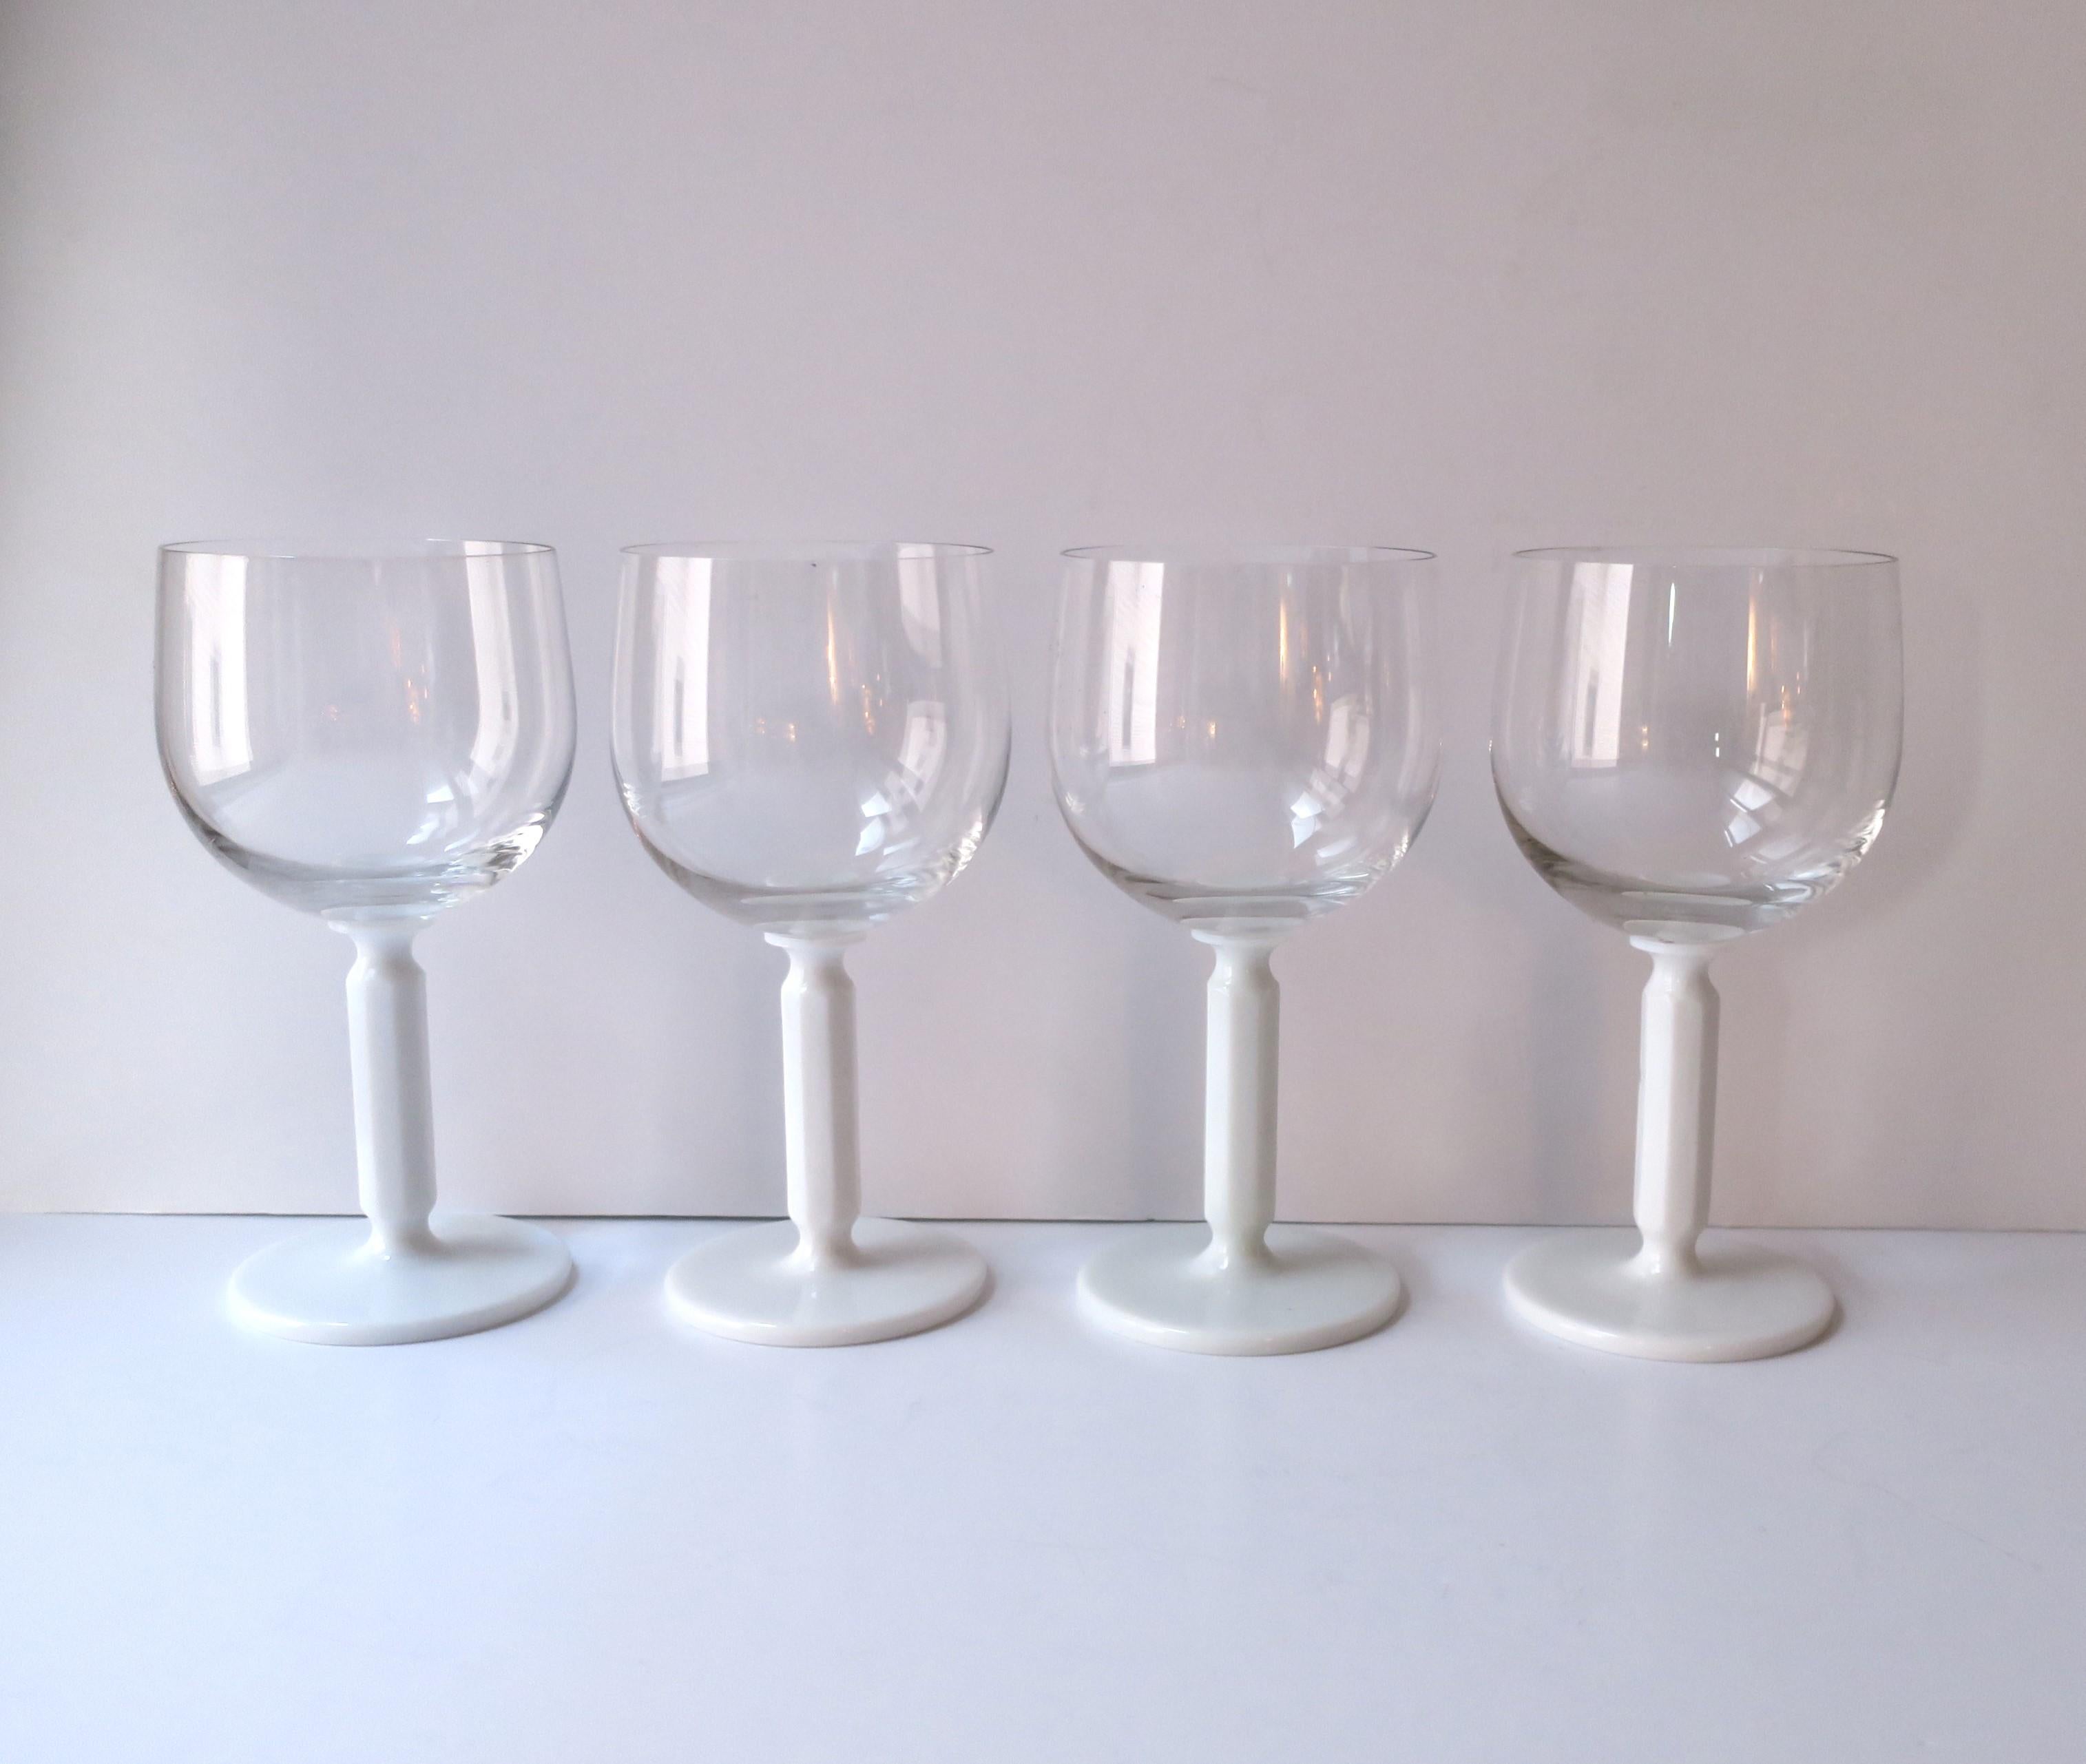 Modern Rosenthal Studio-Line Wine or Cocktail Glasses with White Glass Stem, Set of 4 For Sale